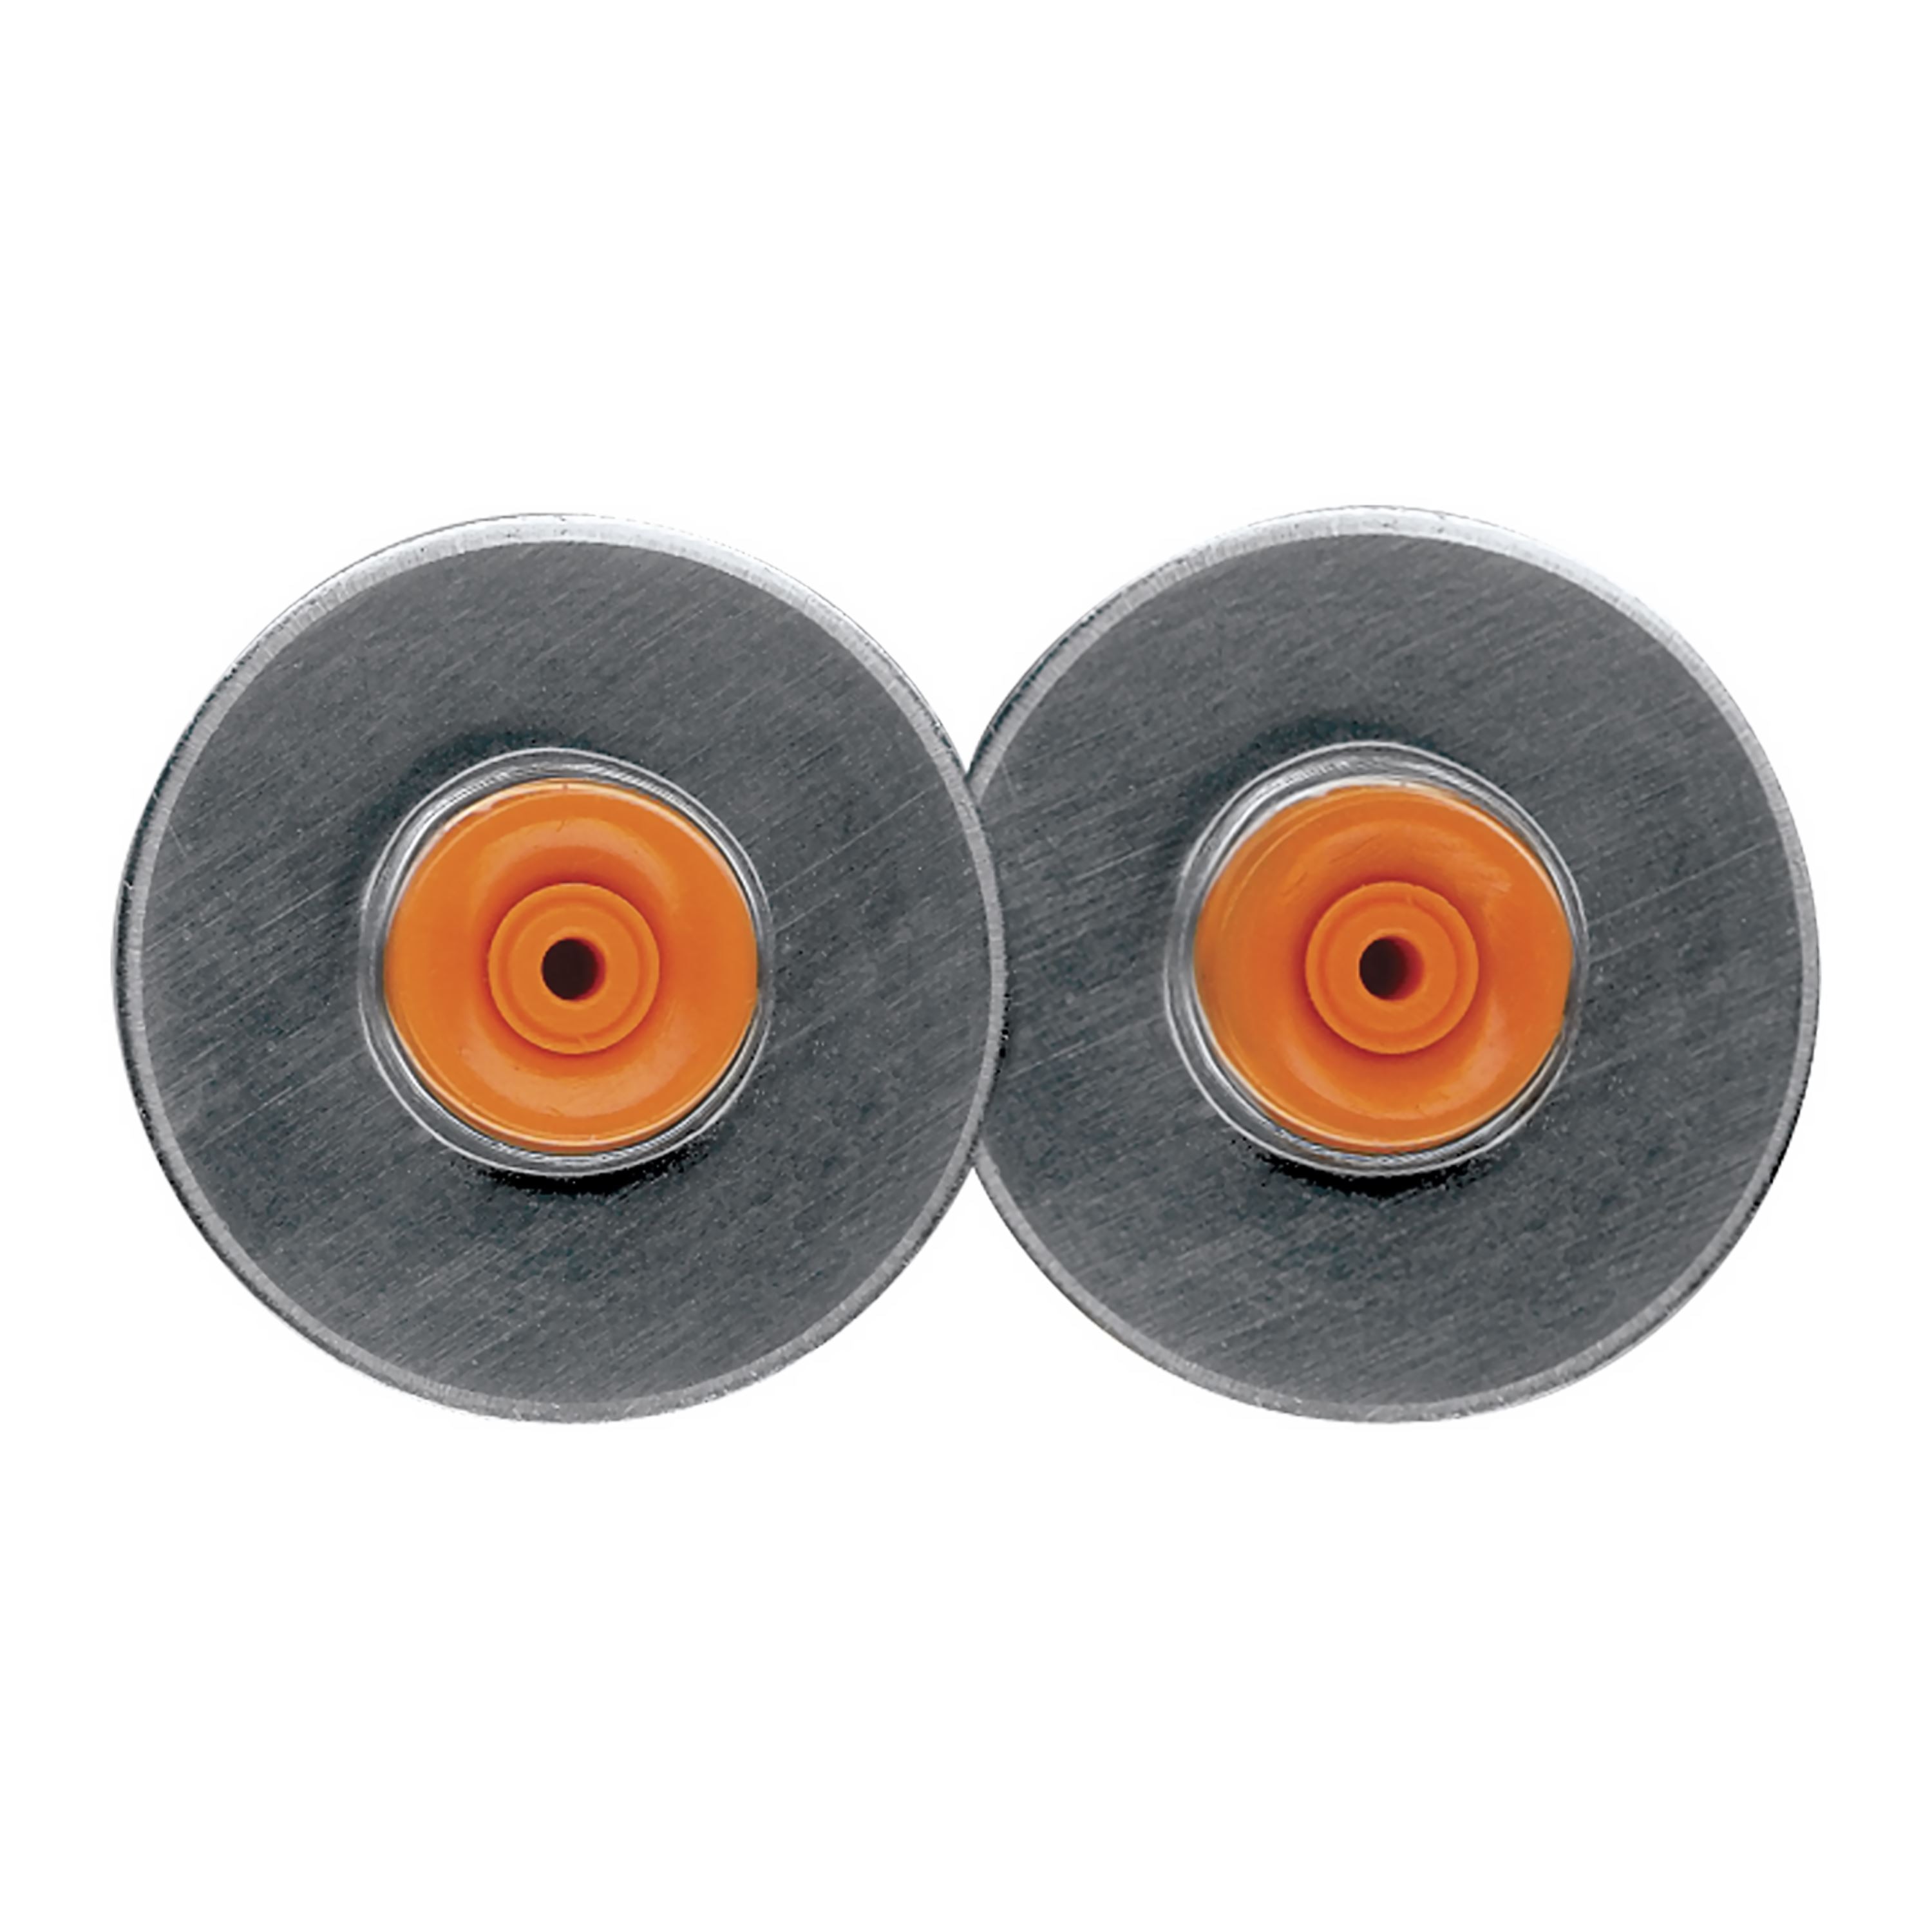 Fiskars Perforating Replacement Rotary Cutter Blades For 45mm